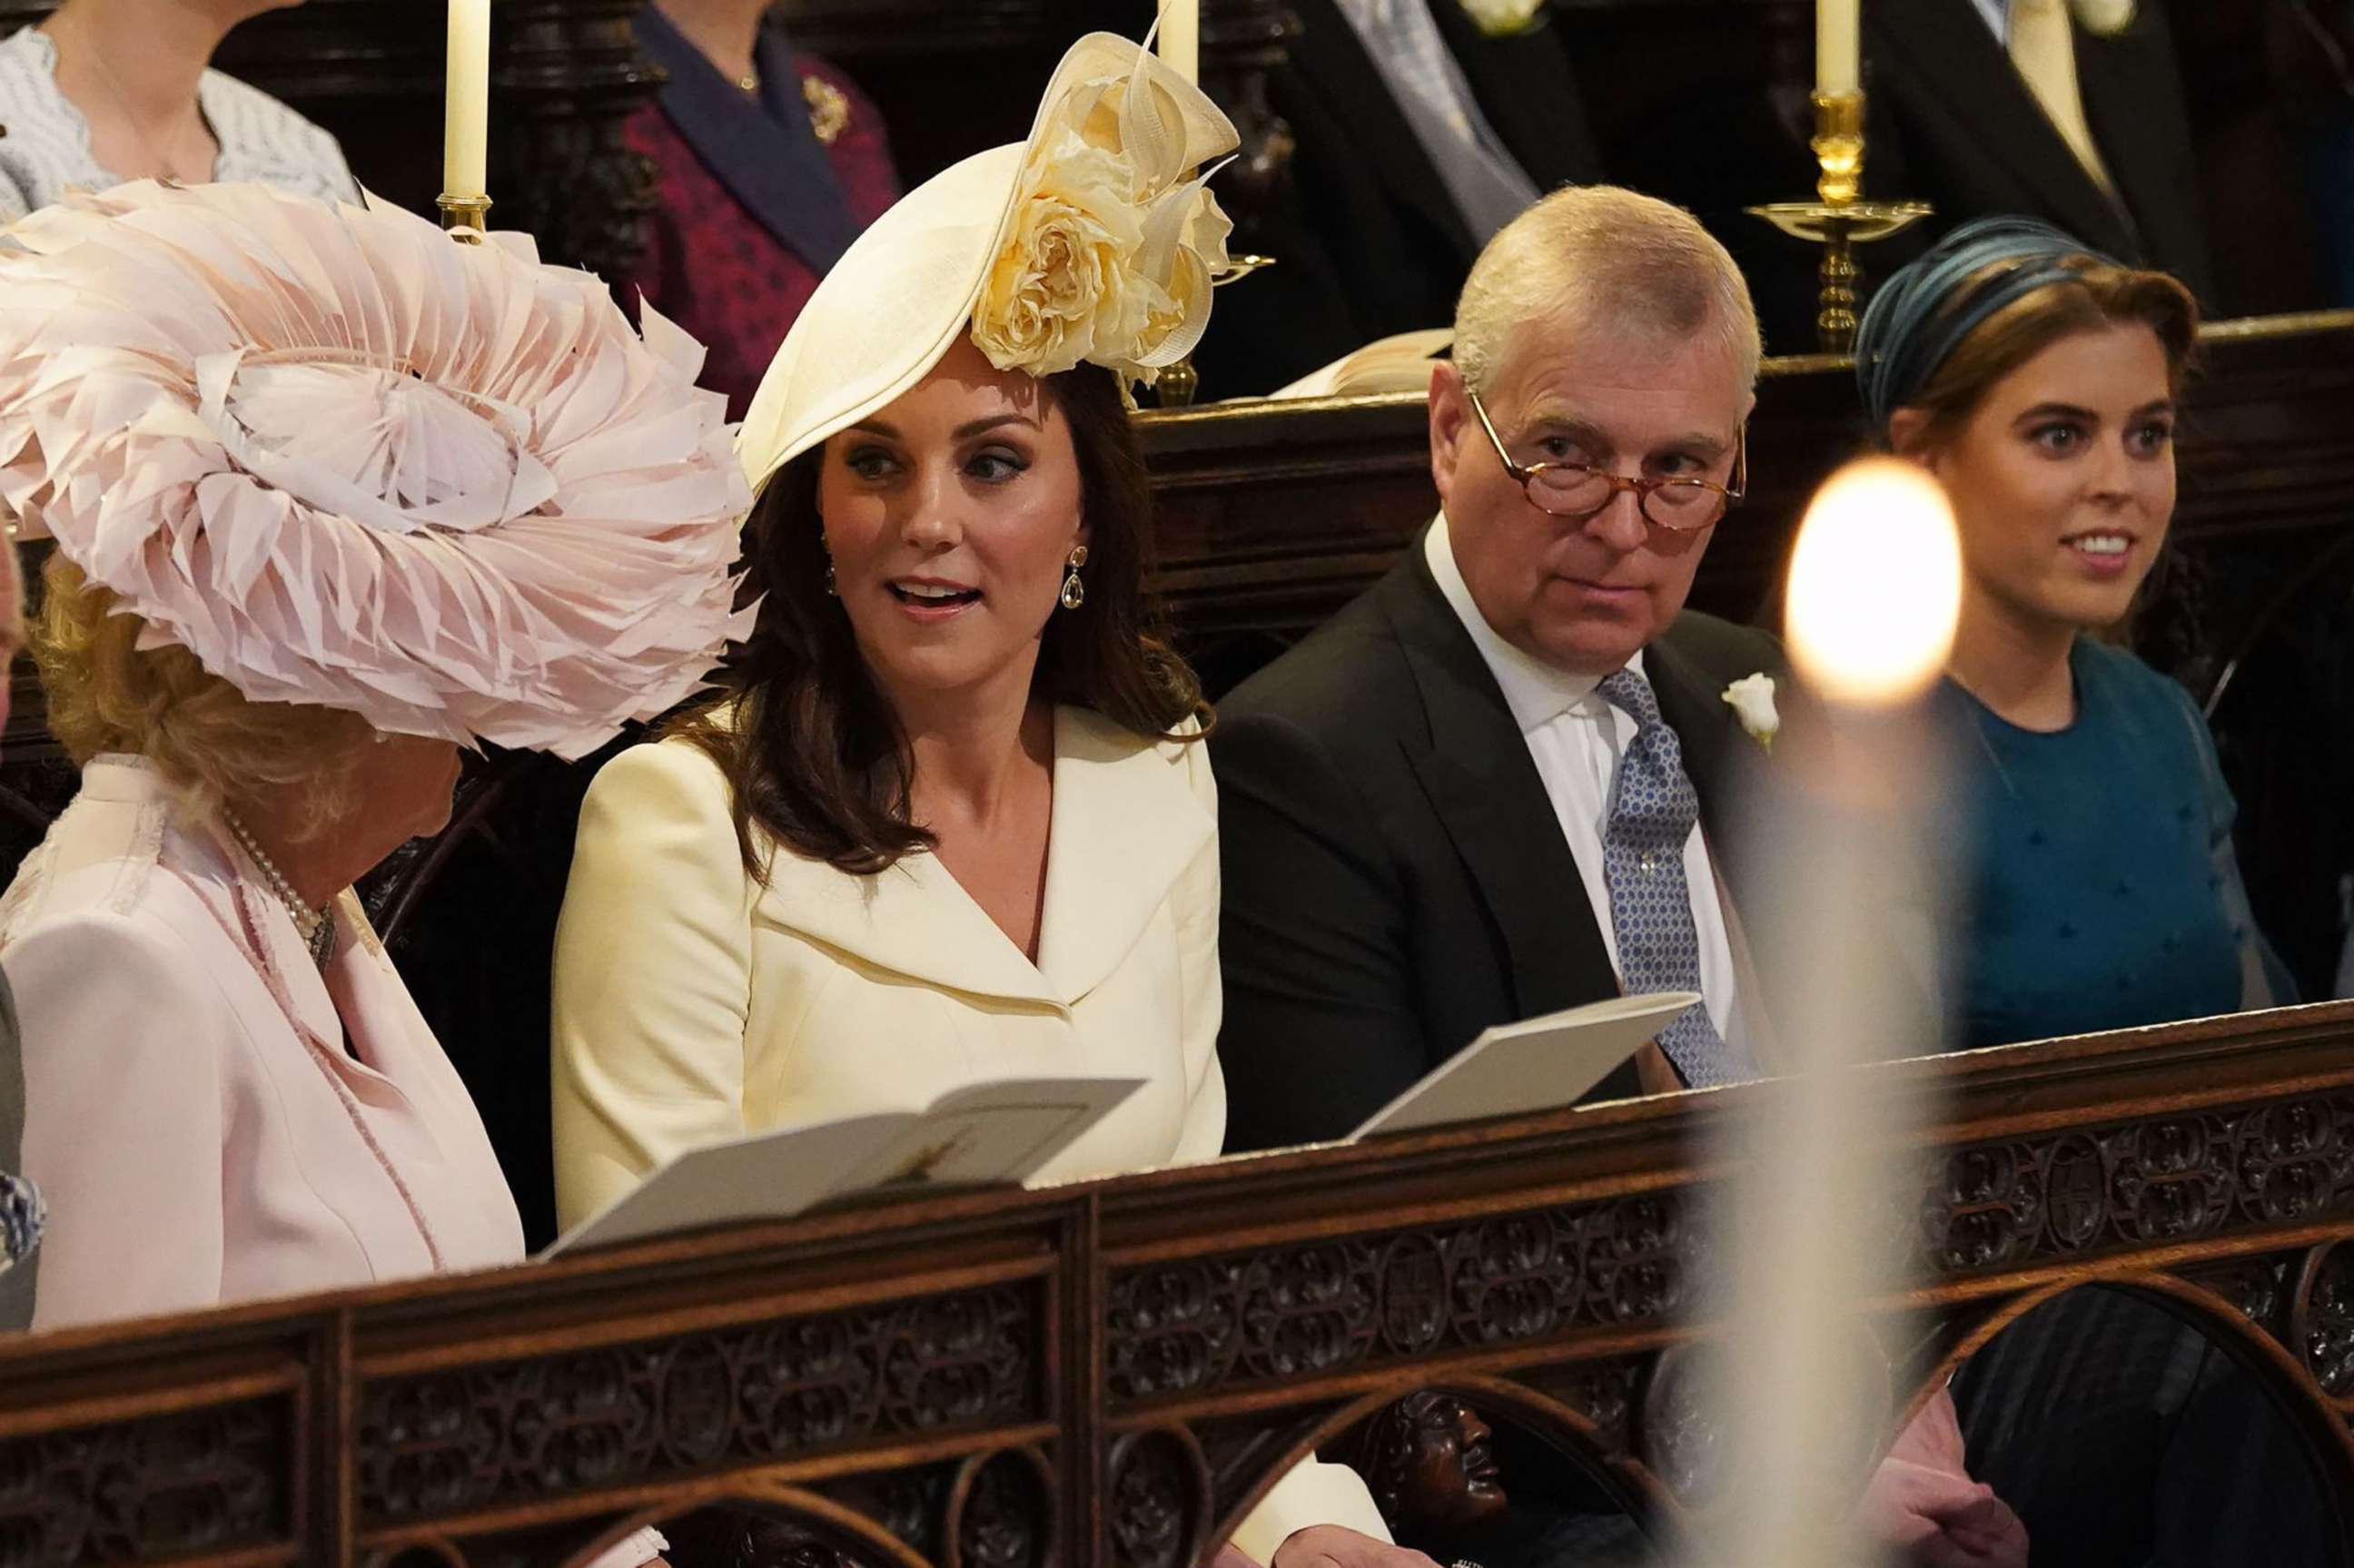 PHOTO: Camilla, Duchess of Cornwall, Catherine, Duchess of Cambridge, Prince Andrew, Duke of York and Princess Beatrice of York wait in the chapel ahead of the wedding ceremony of Britain's Prince Harry and Meghan Markle, May 19, 2018.